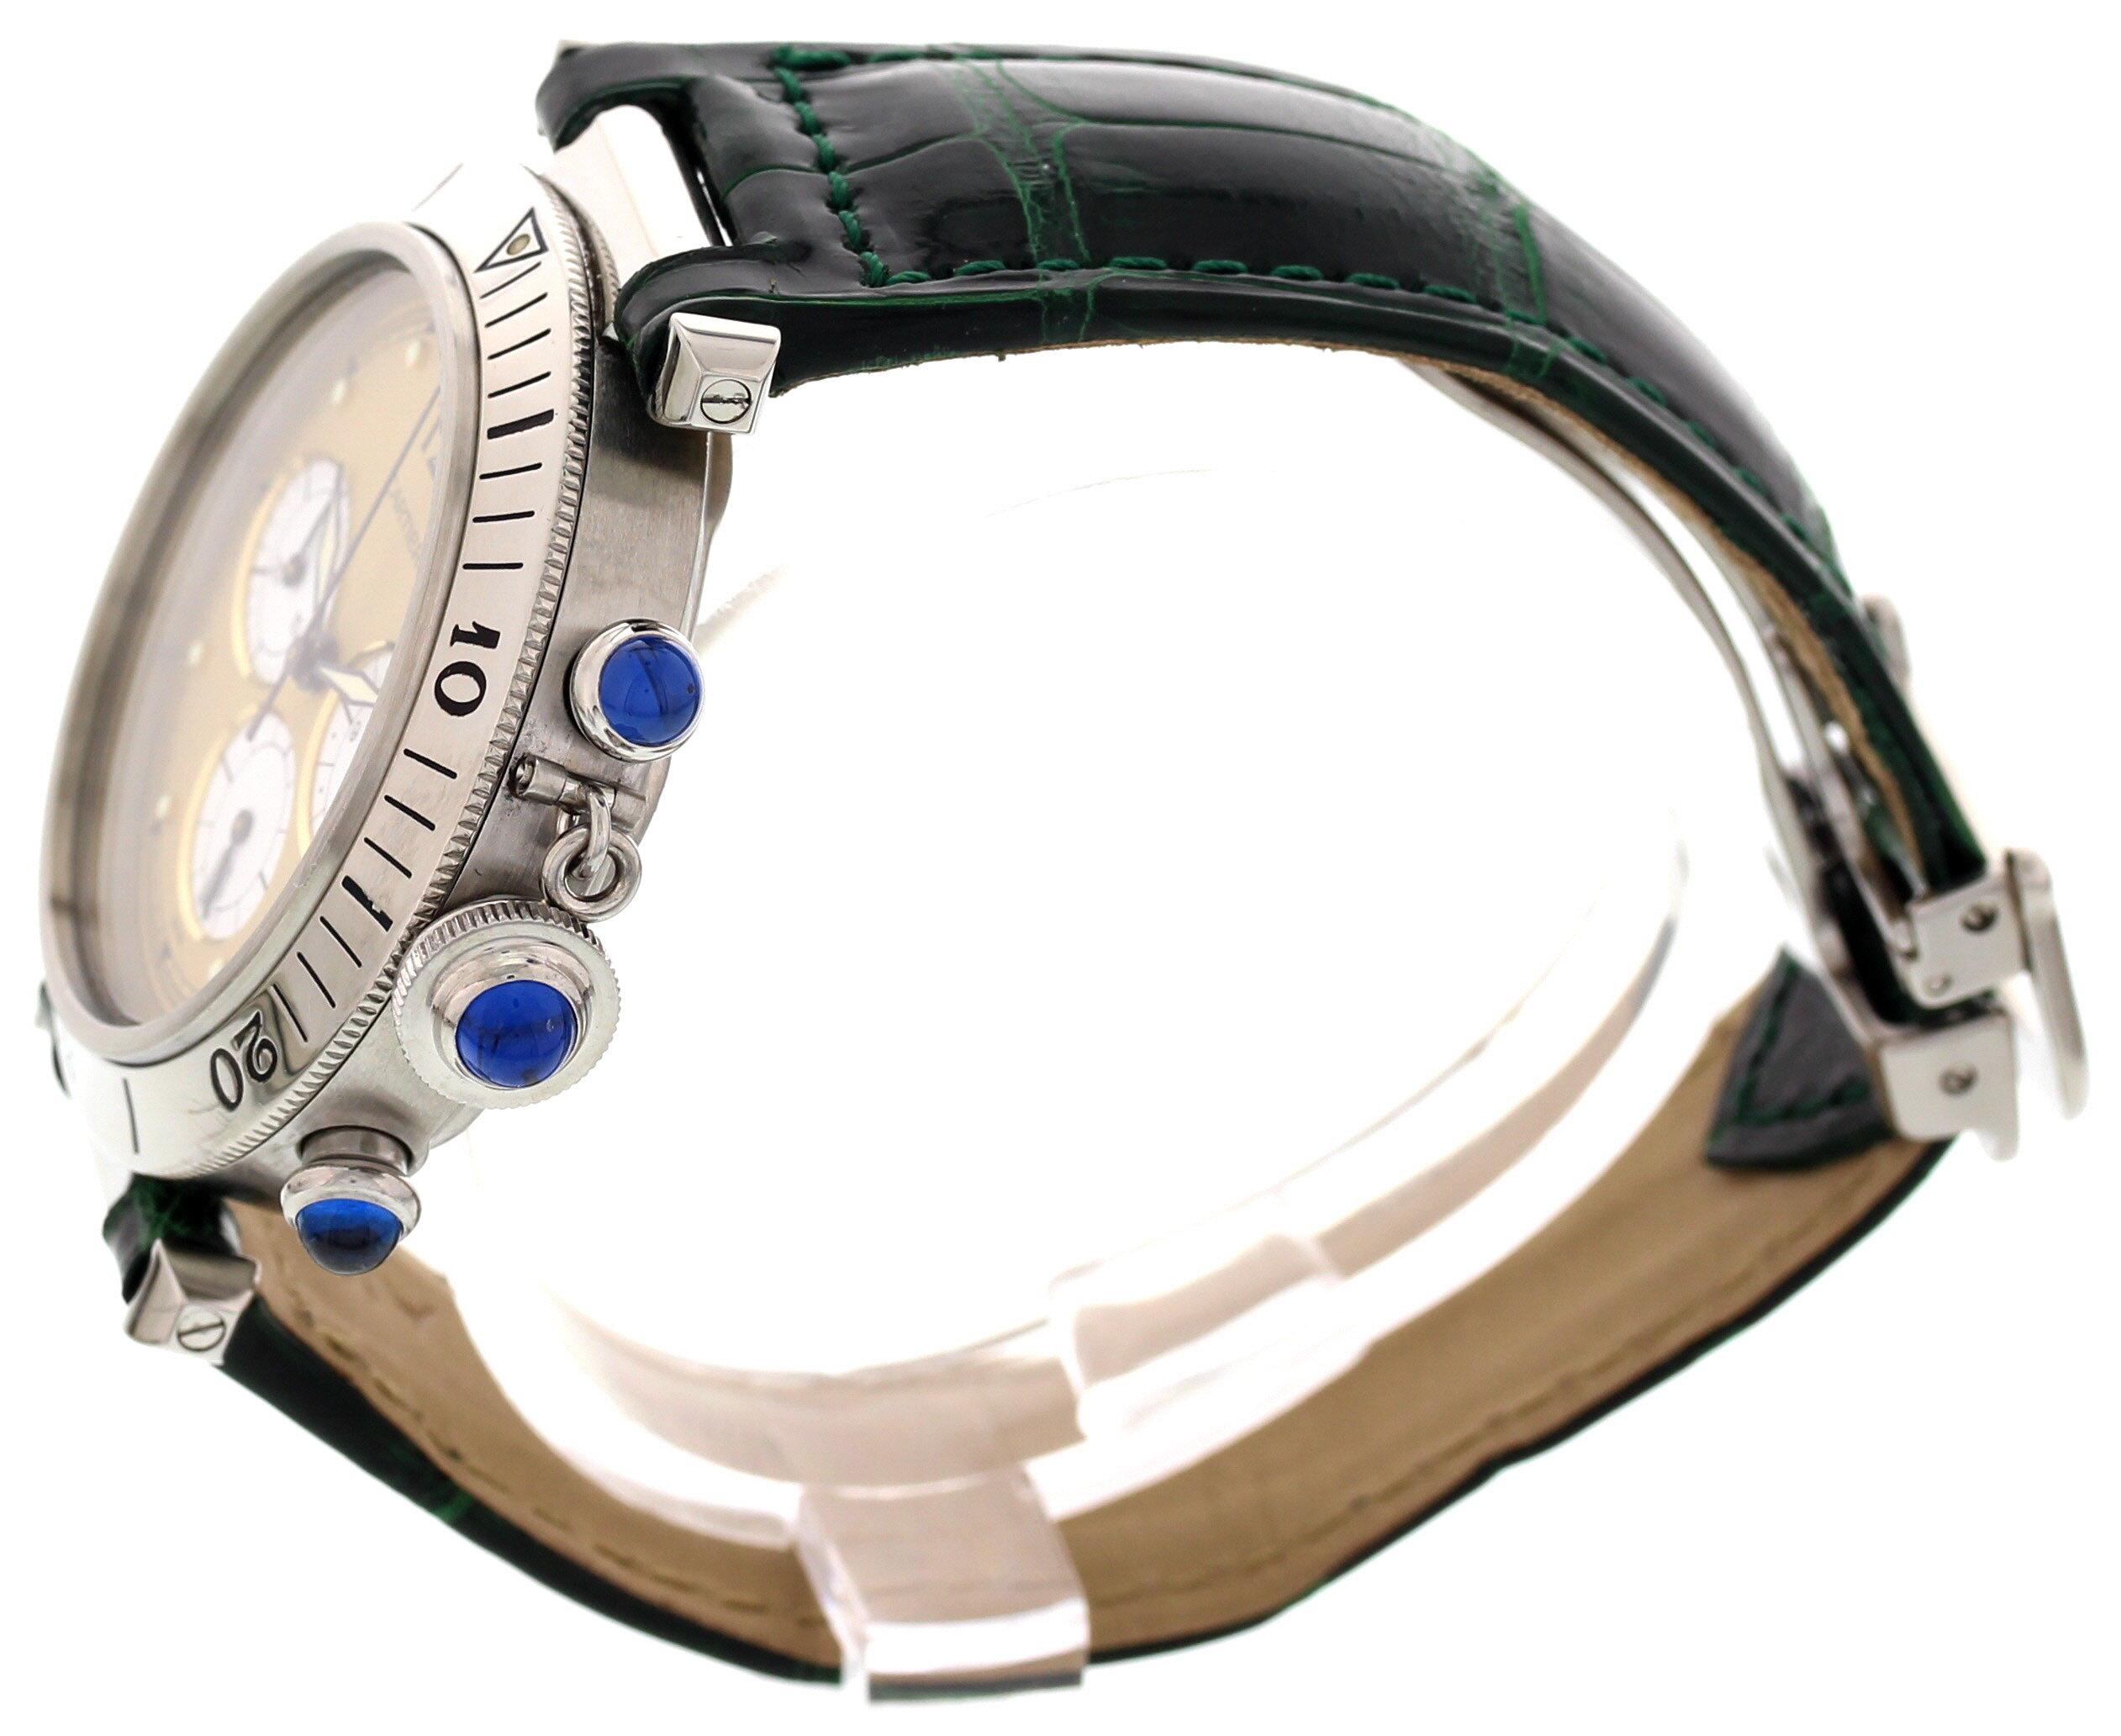 Men's Pasha de Cartier. Stainless steel 38 mm case. Stainless steel count-up bezel. Beige dial with white sub-dials. The crown contains a blue cabochon. Features include a chronograph and luminous hands & markers. Green leather band with a stainless